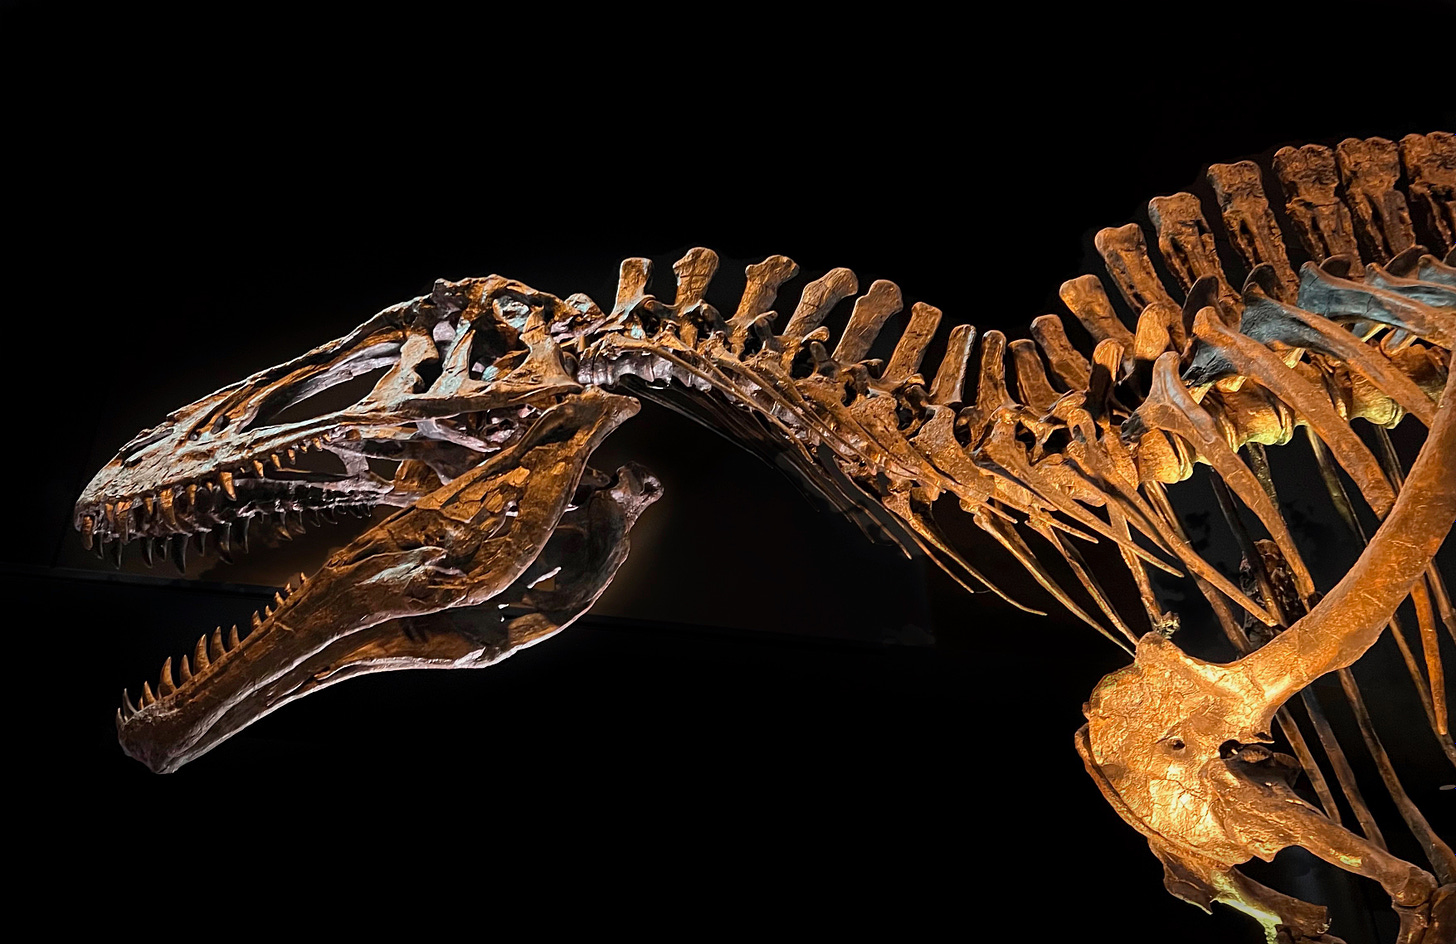 The skeleton of a dinosaur with an open jaw and teeth against a black background